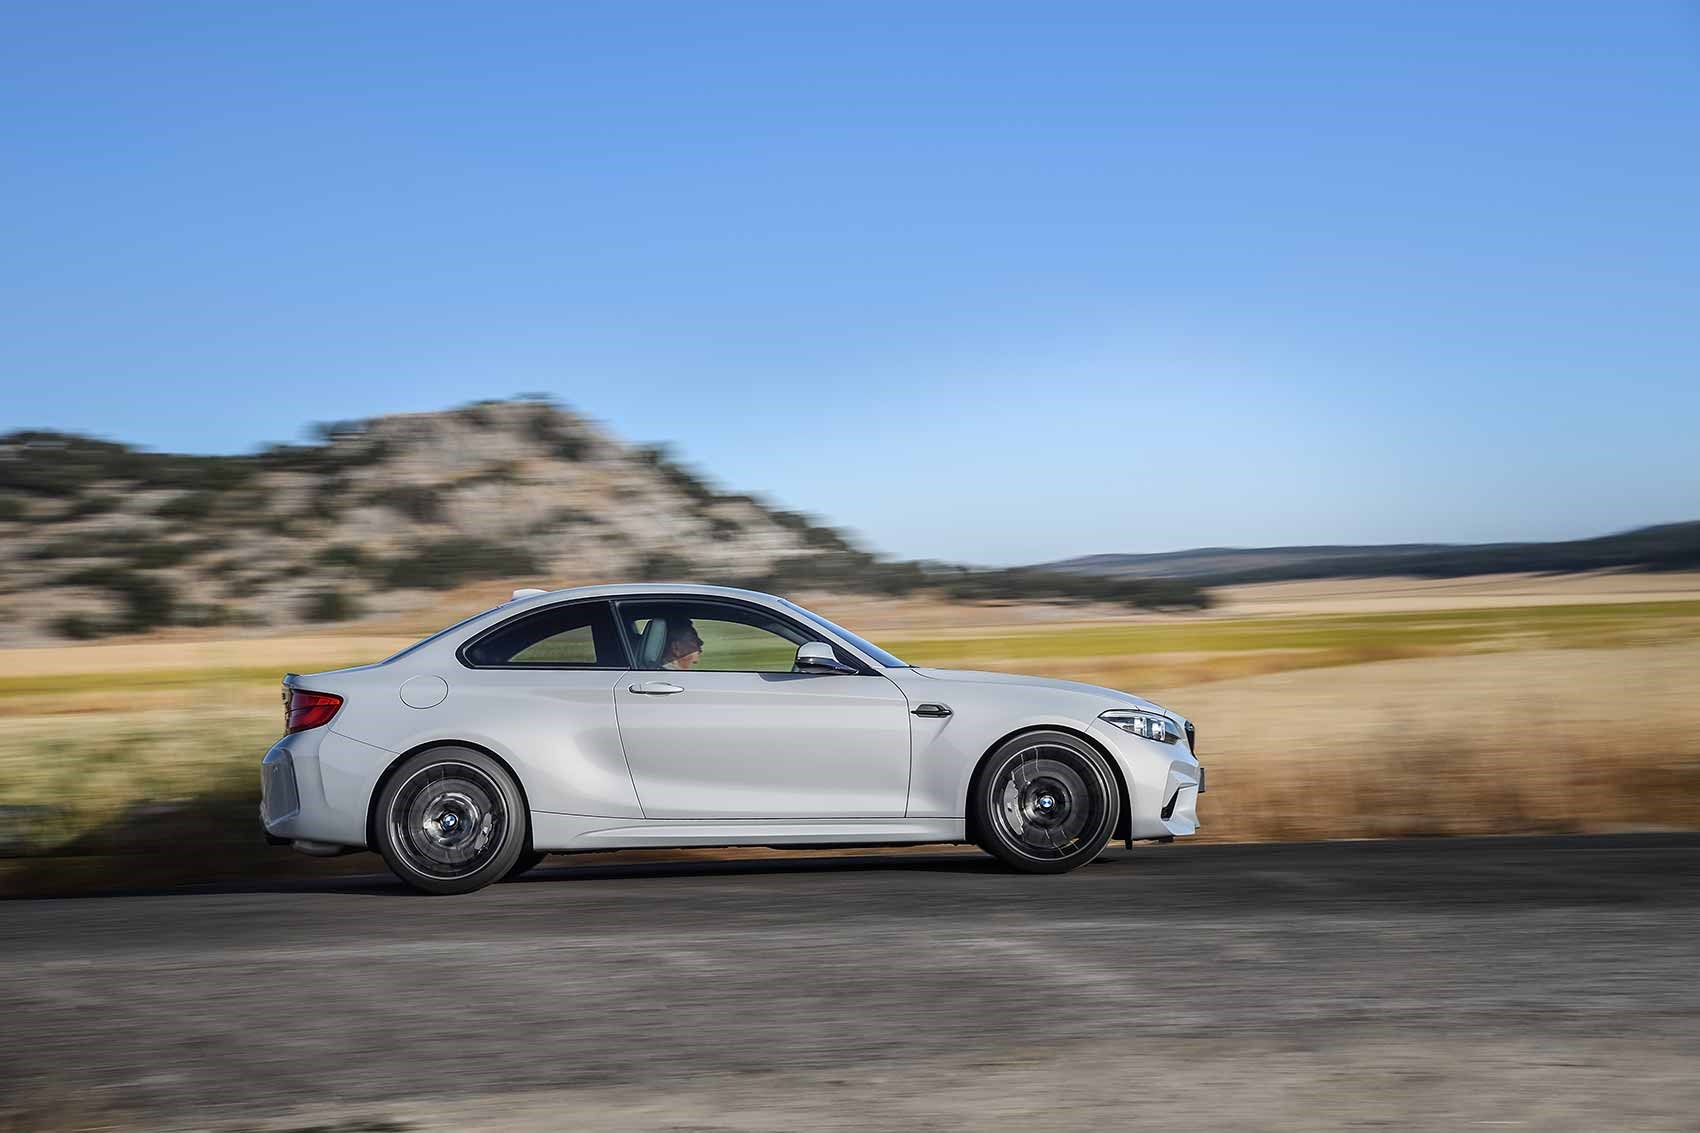 Georg Kacher drives the BMW M2 Competition for CAR magazine